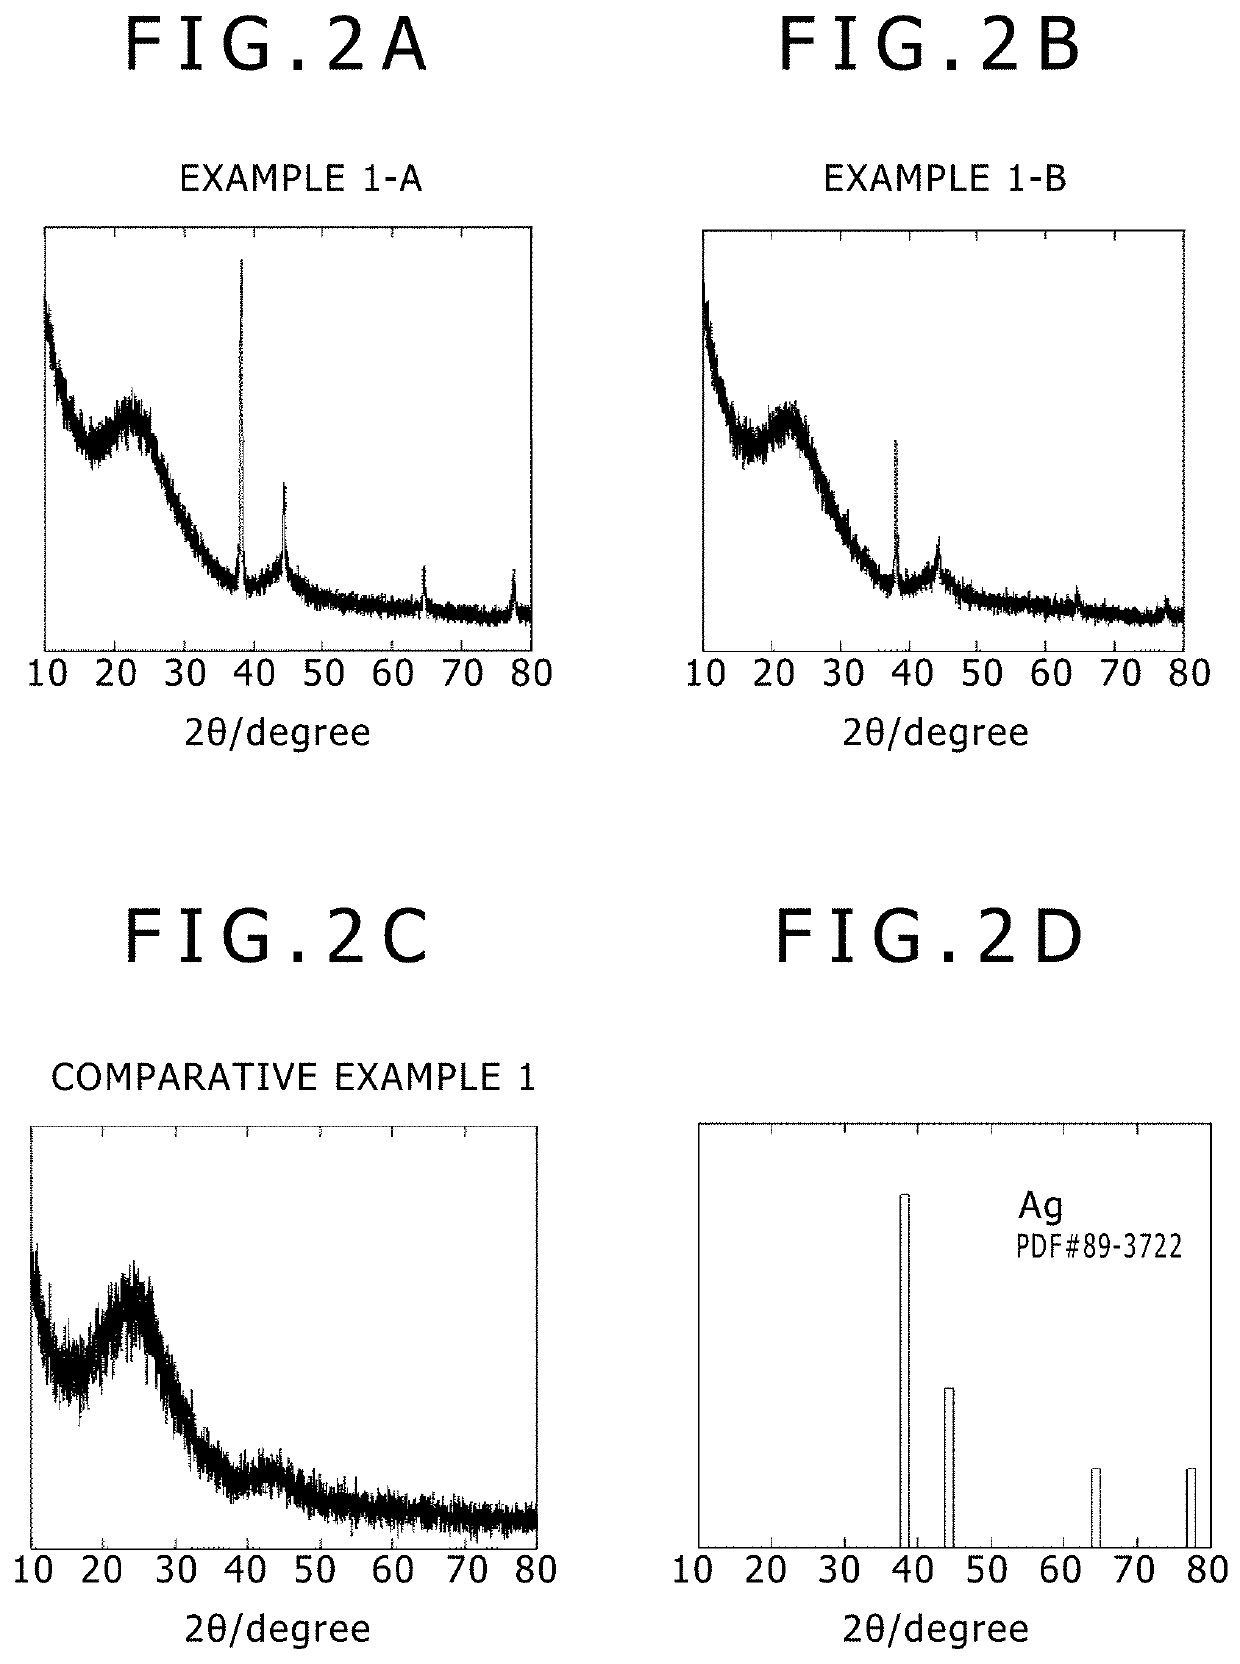 Fungicide, photo catalytic composite material, adsorbent, and depurative